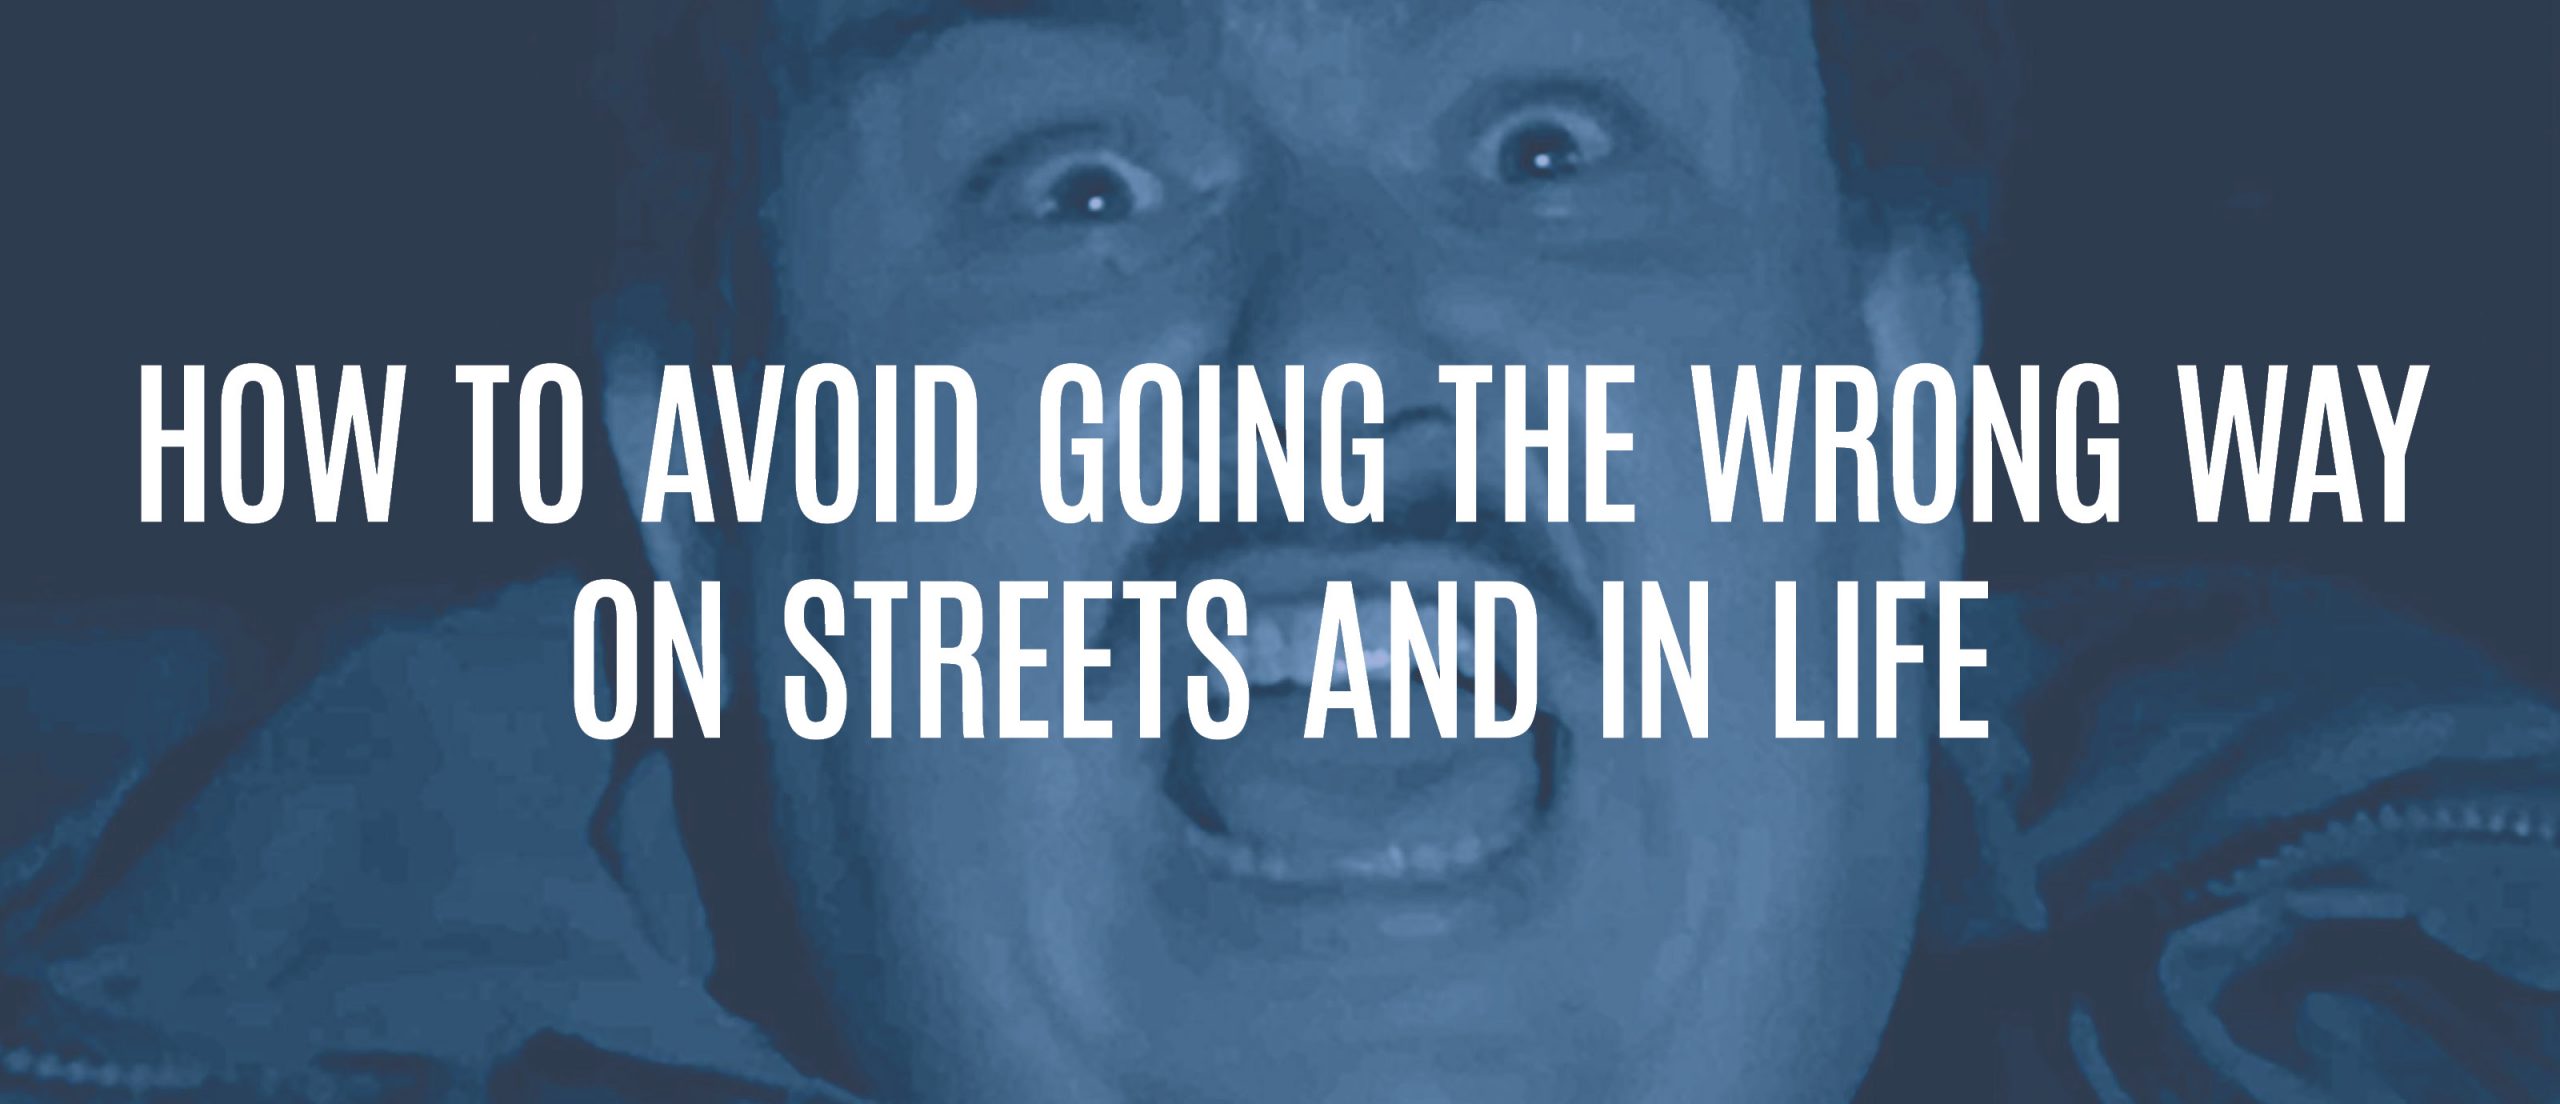 Blog title: How to avoid going the wrong way on streets and in life